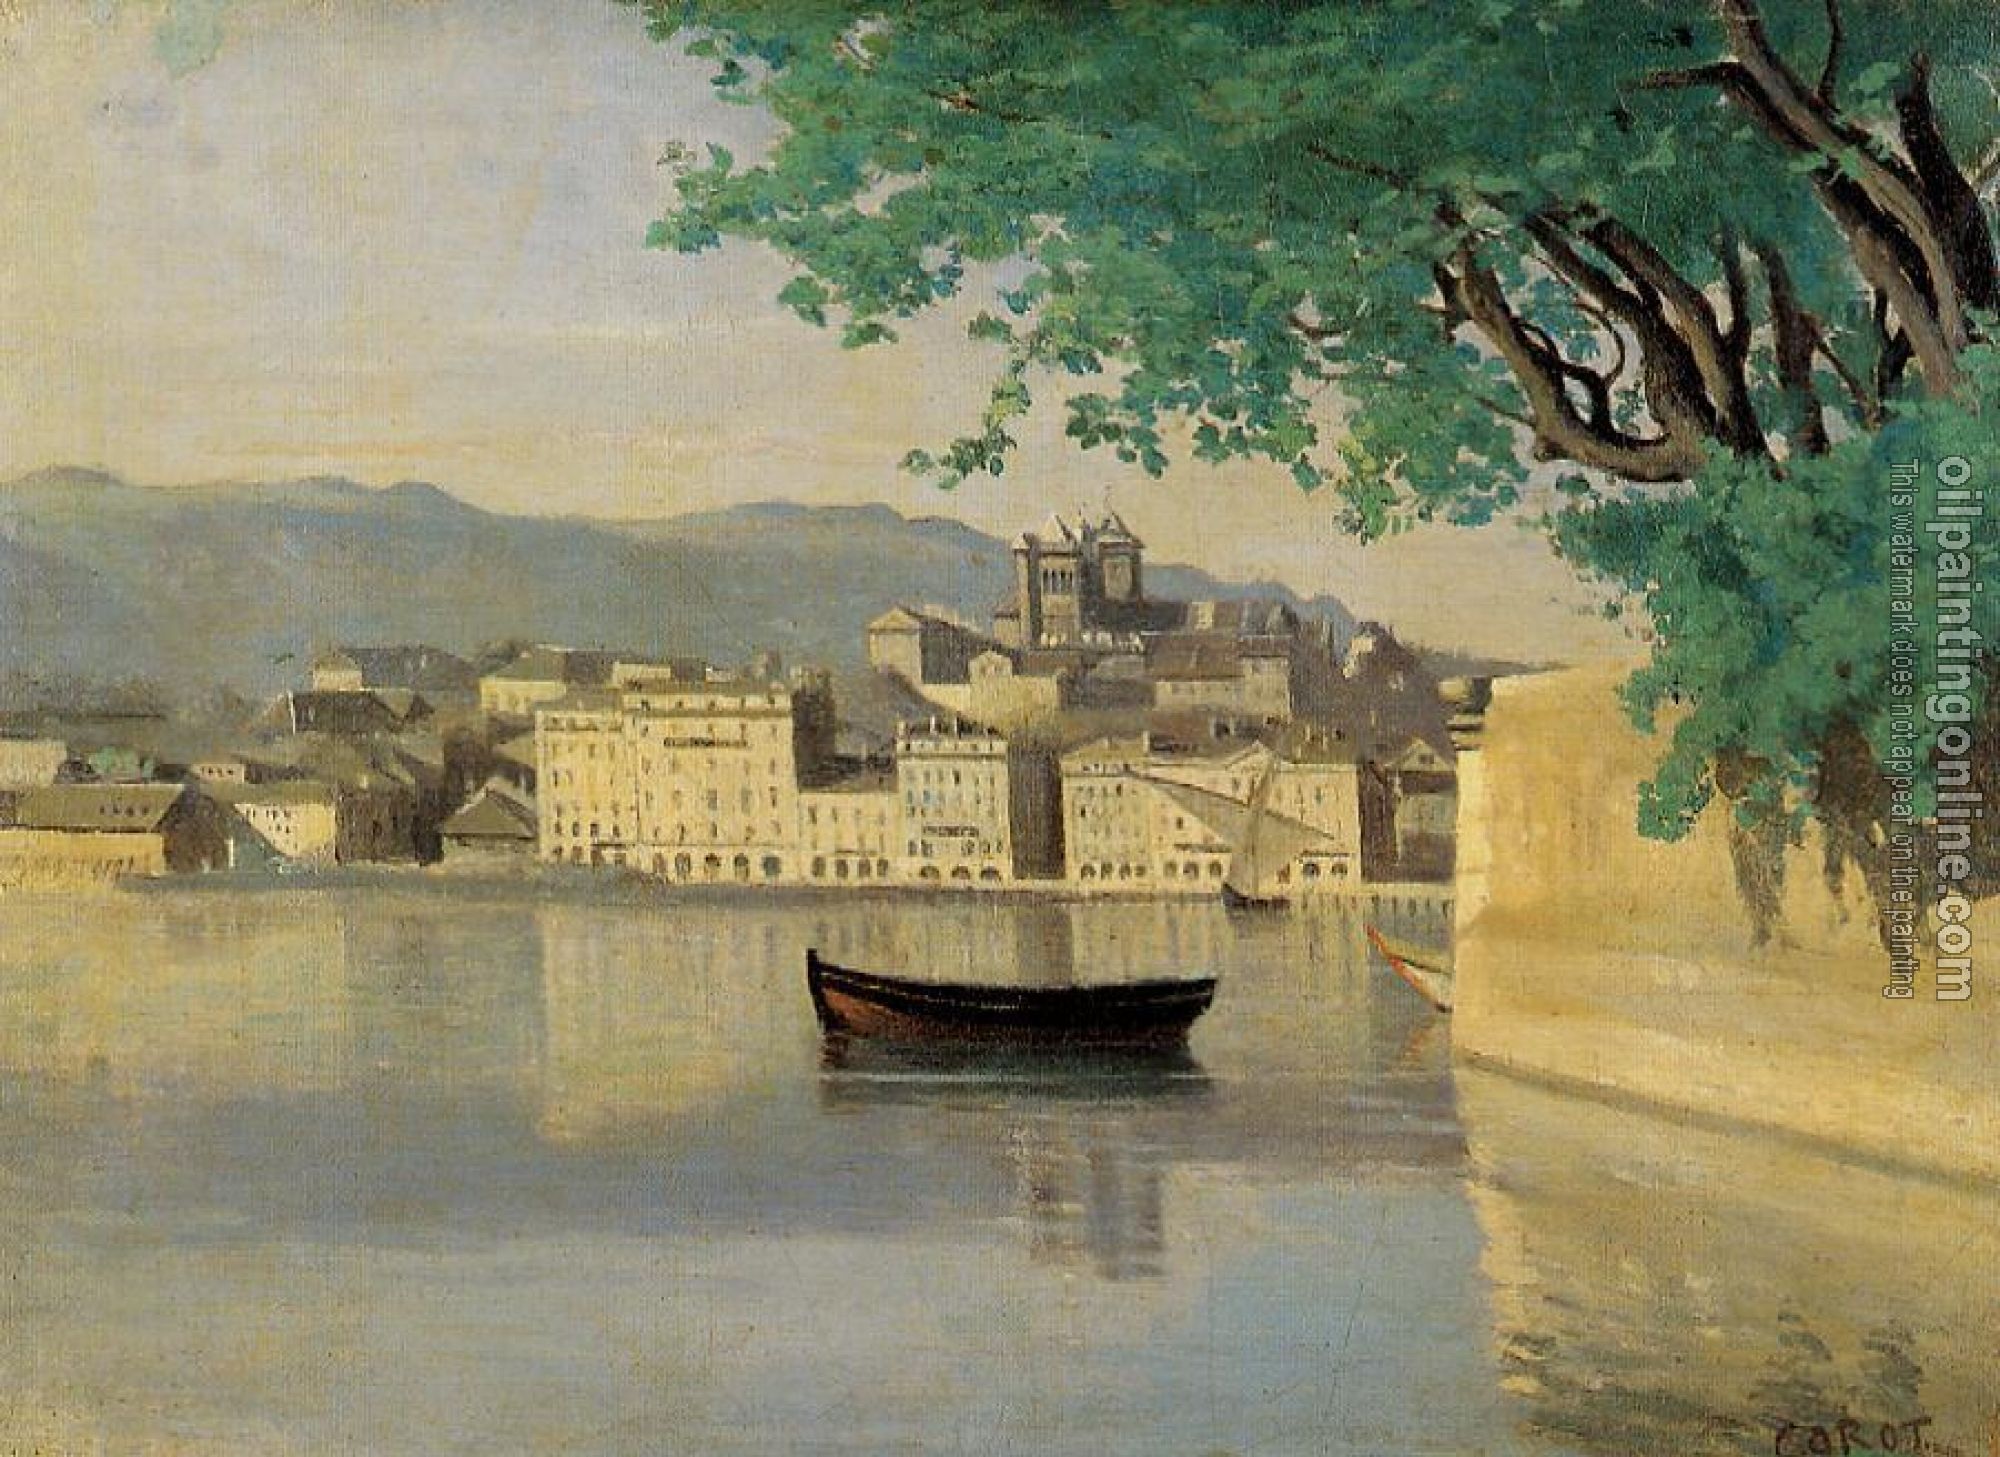 Corot, Jean-Baptiste-Camille - Geneva - View of Part of the City